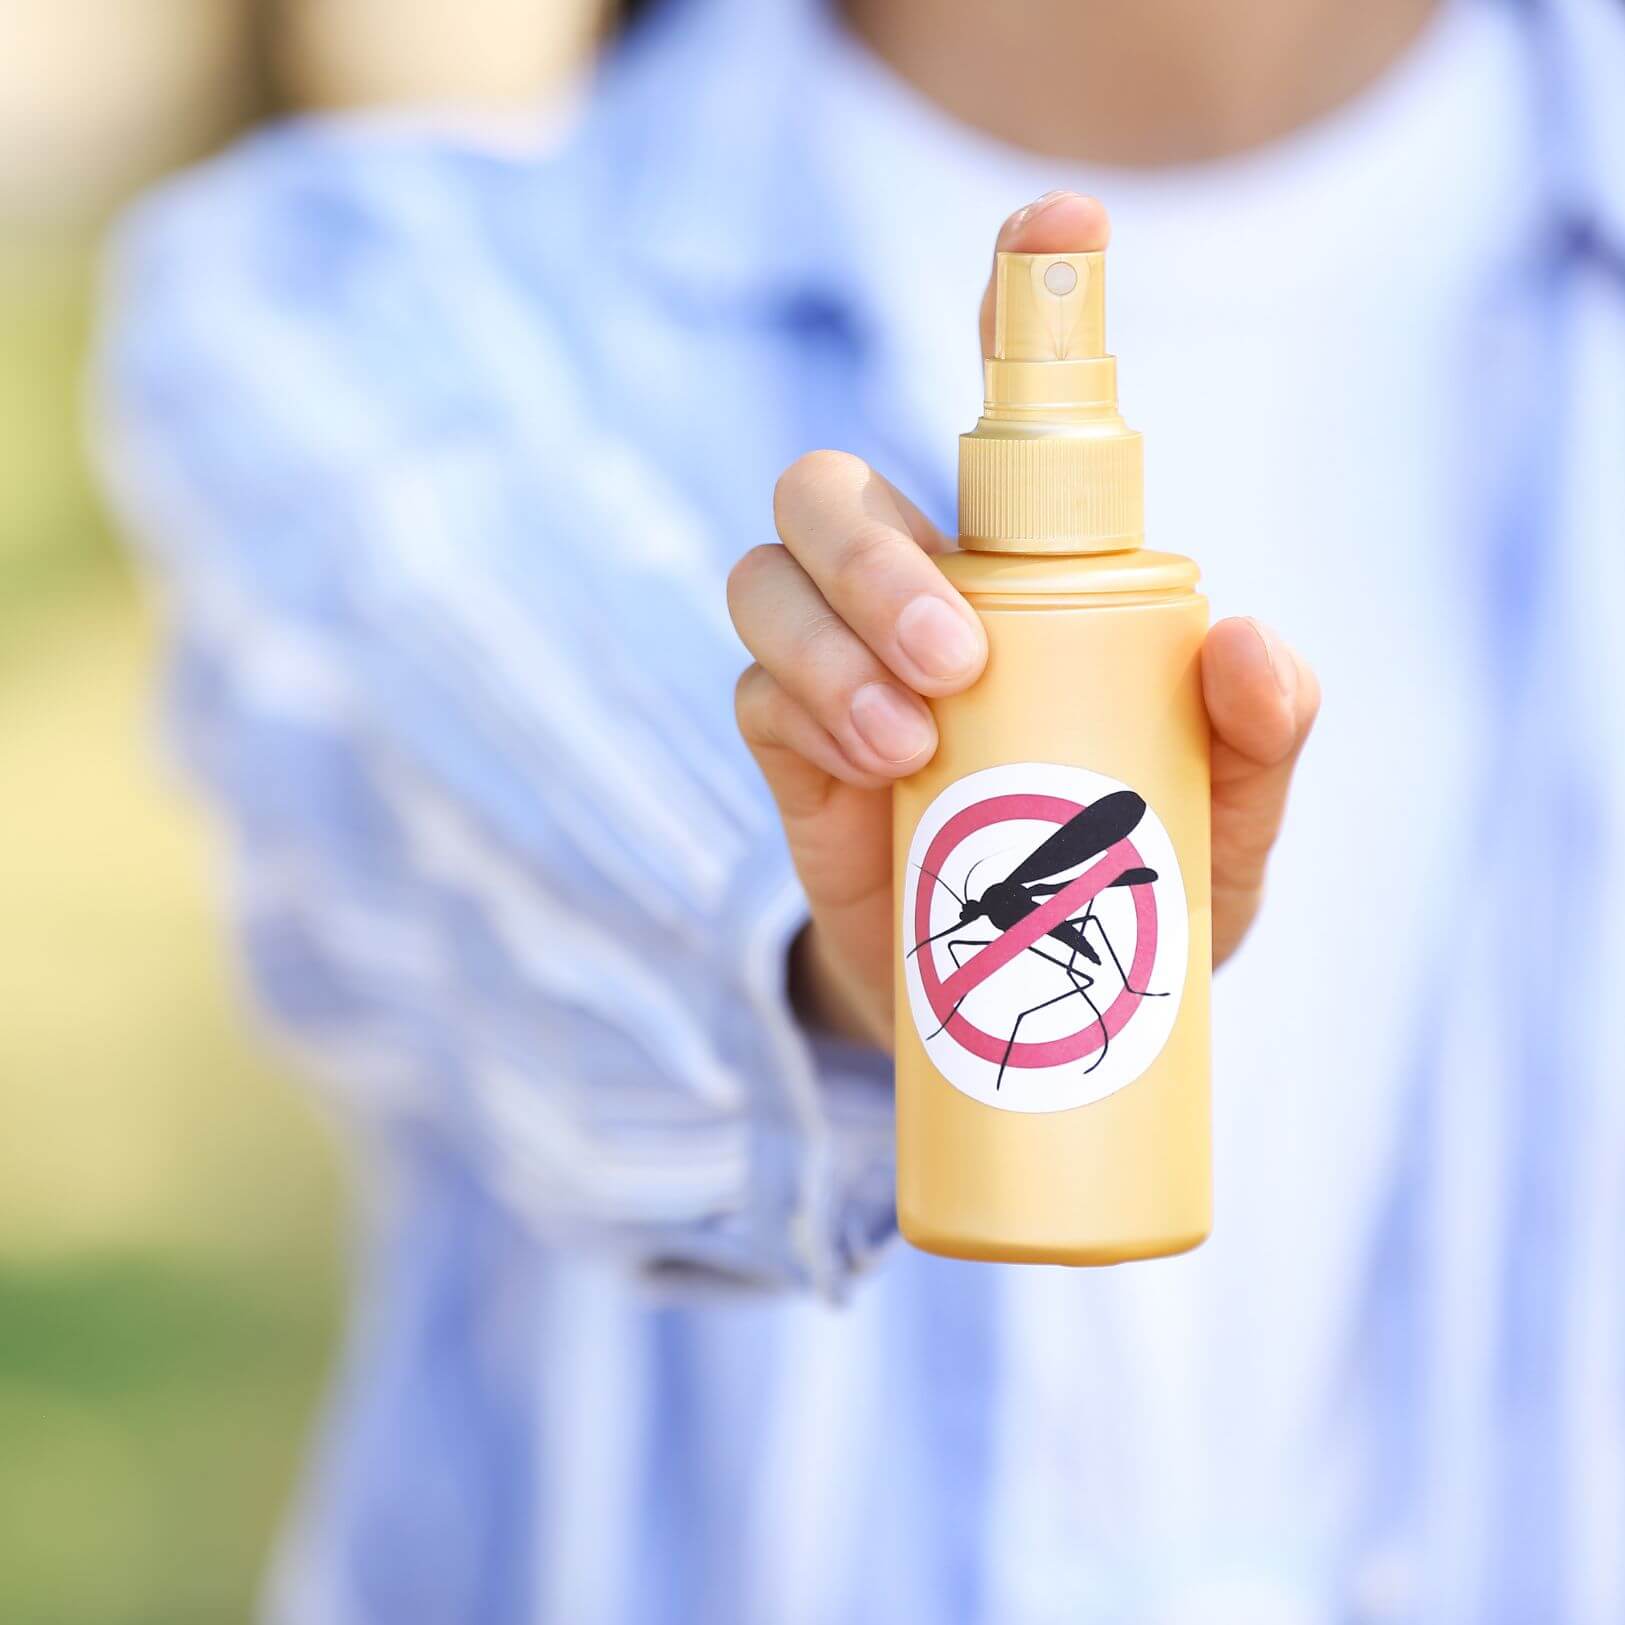 5 Natural Insect Repellent Tips